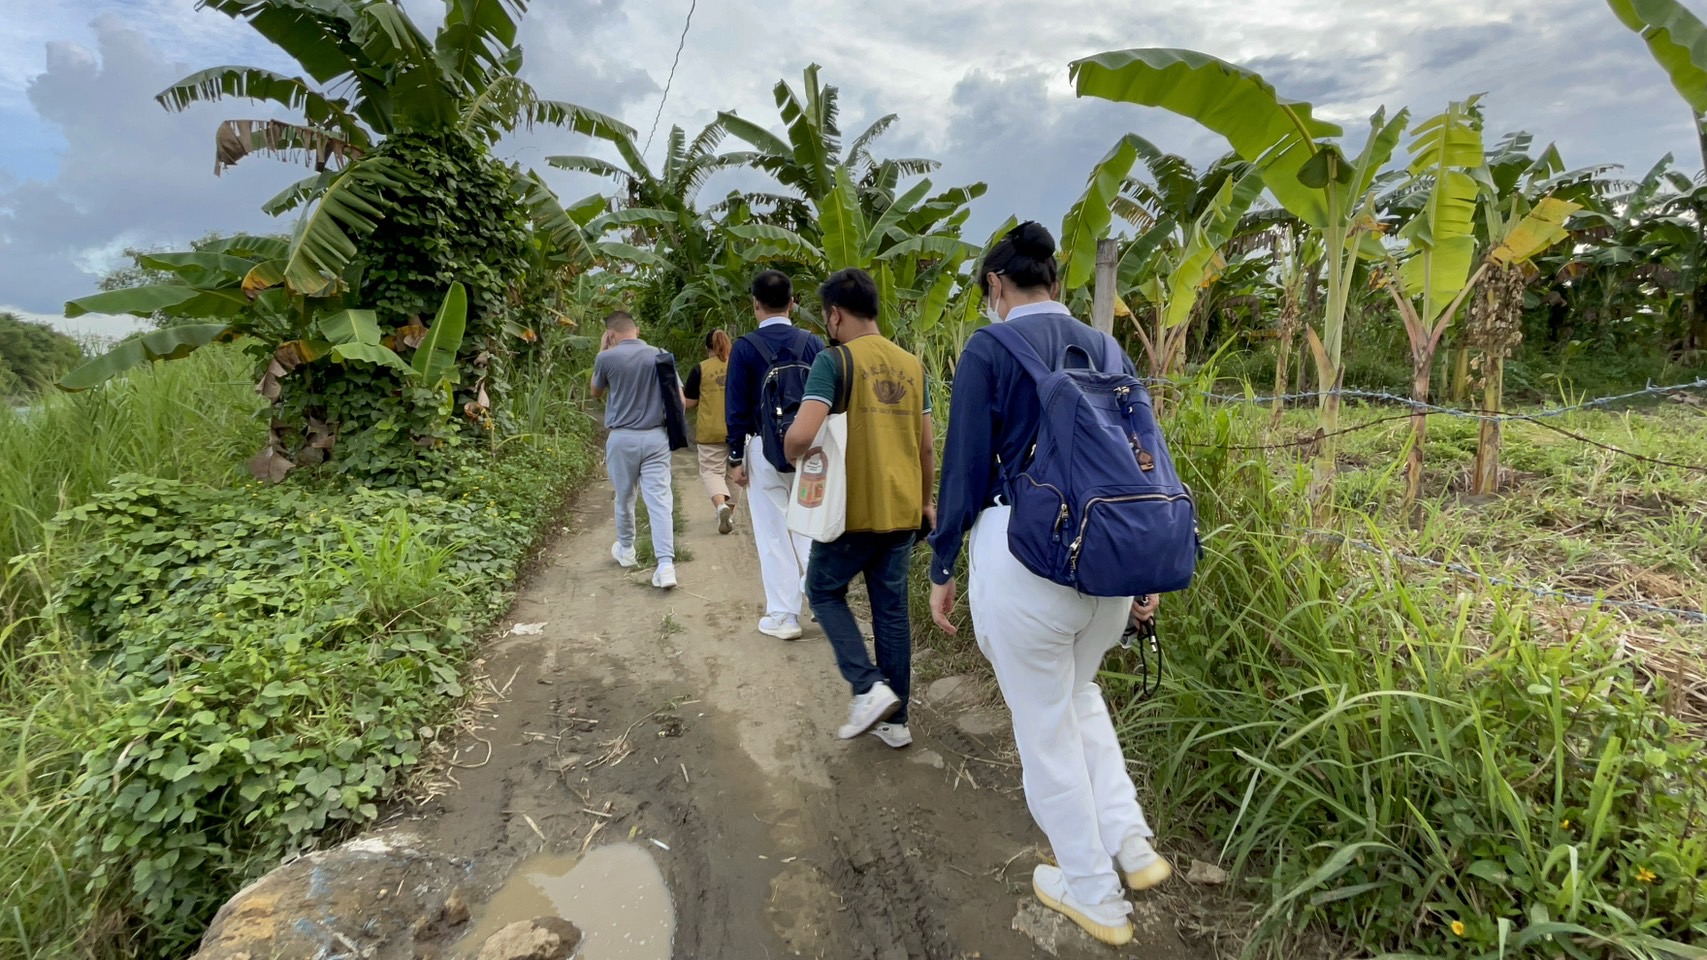 In Iloilo, Tzu Chi volunteers conducted home visits in remote areas, in an effort to extend educational assistance to less-fortunate but deserving students all over the country.【Photo by Jeaneal Dando】